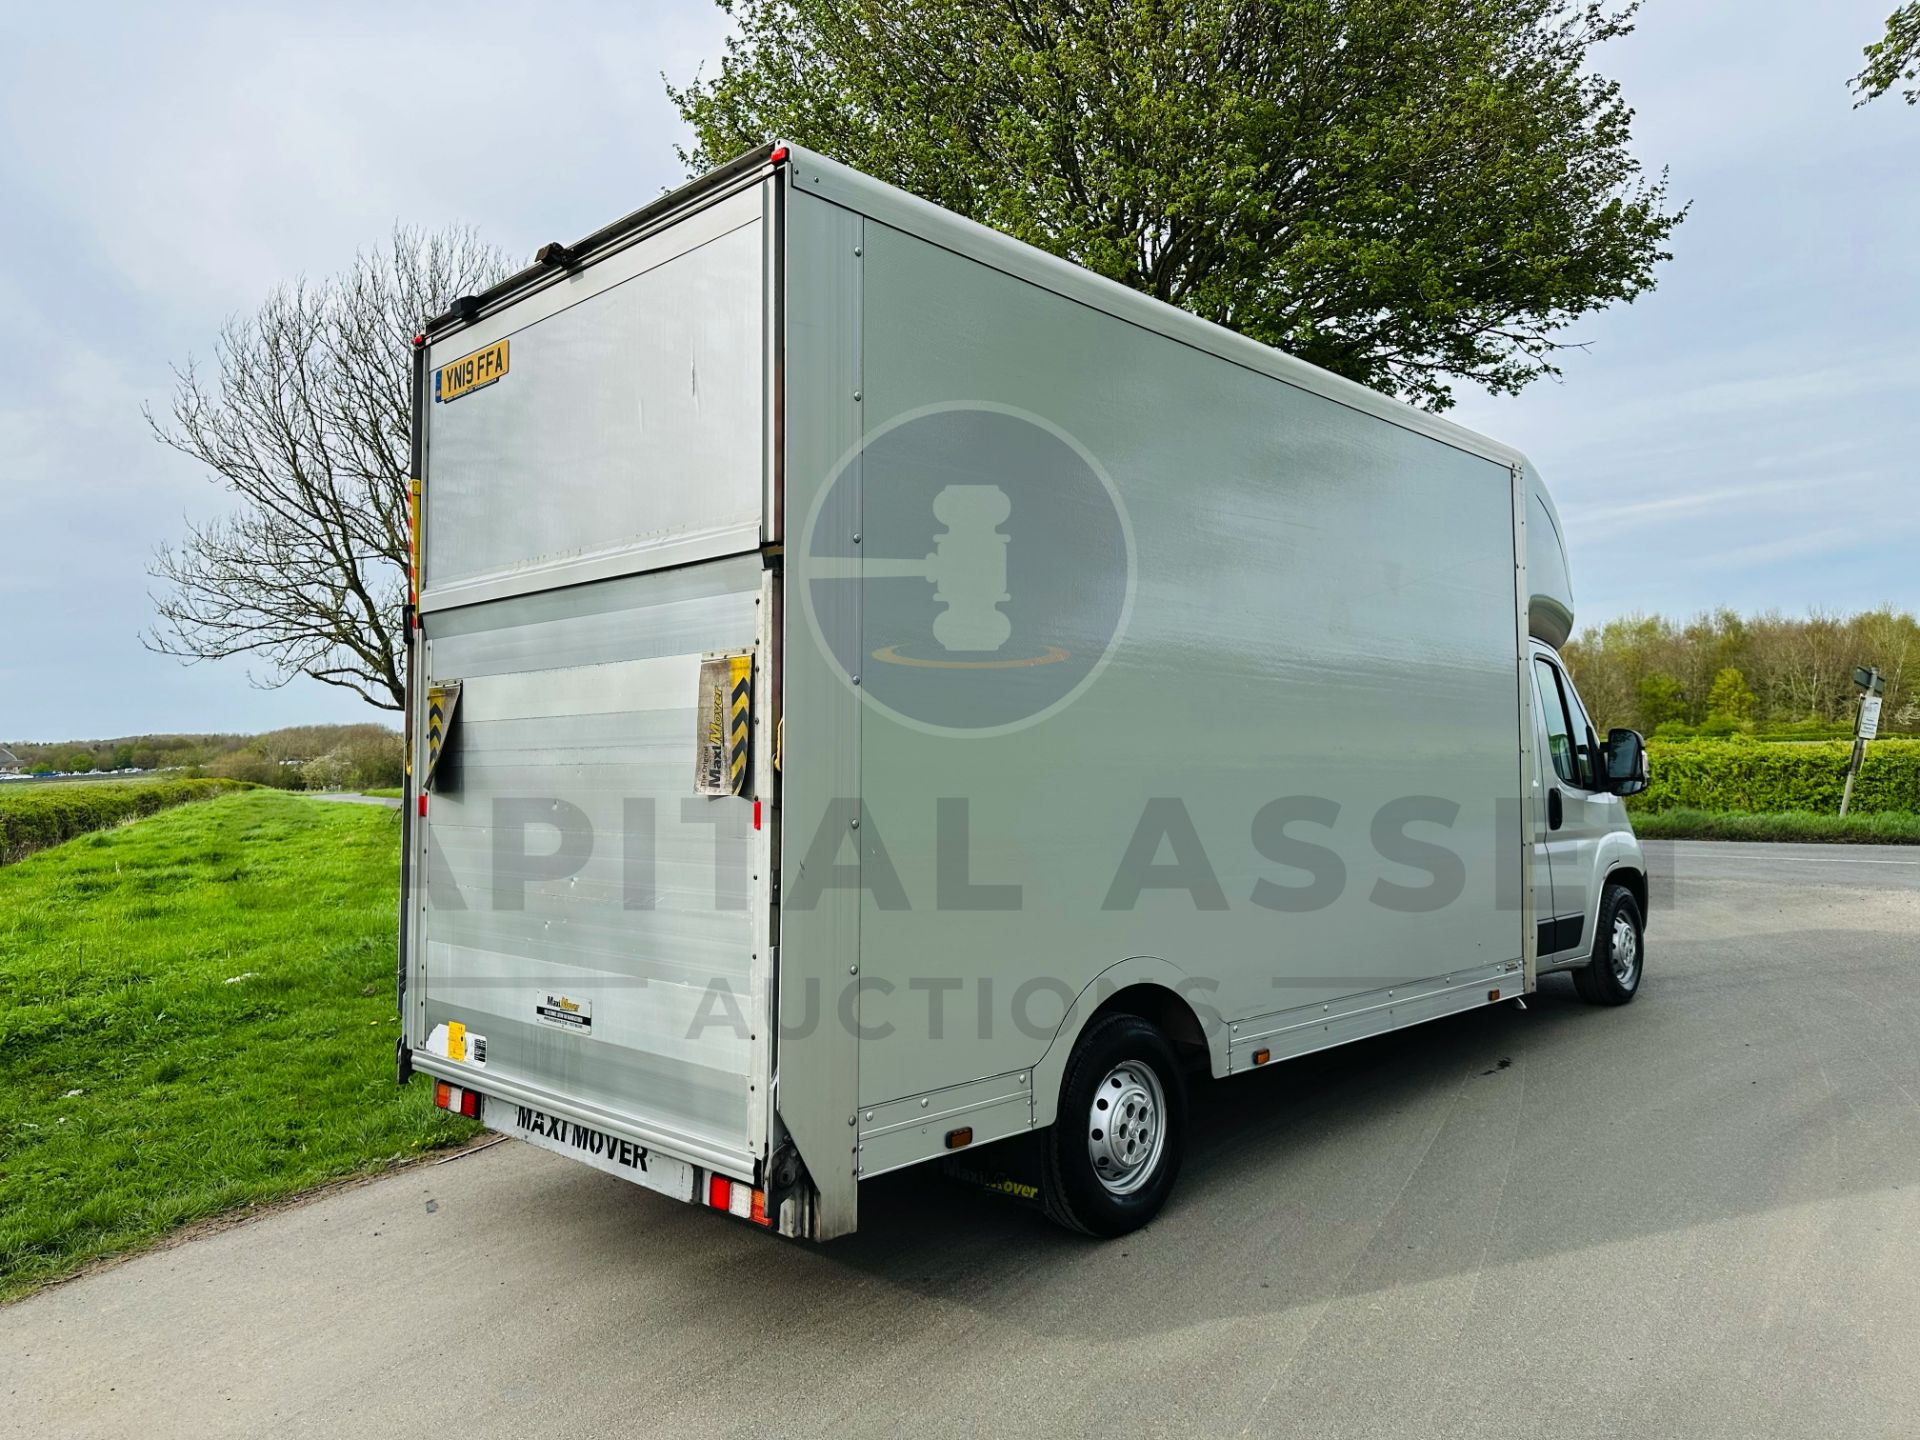 (ON SALE) PEUGEOT BOXER 335 *LWB LOW LOADER / MAXI MOVER LUTON* (2019 - EURO 6) 2.0 BLUE HDI *A/C* - Image 9 of 27